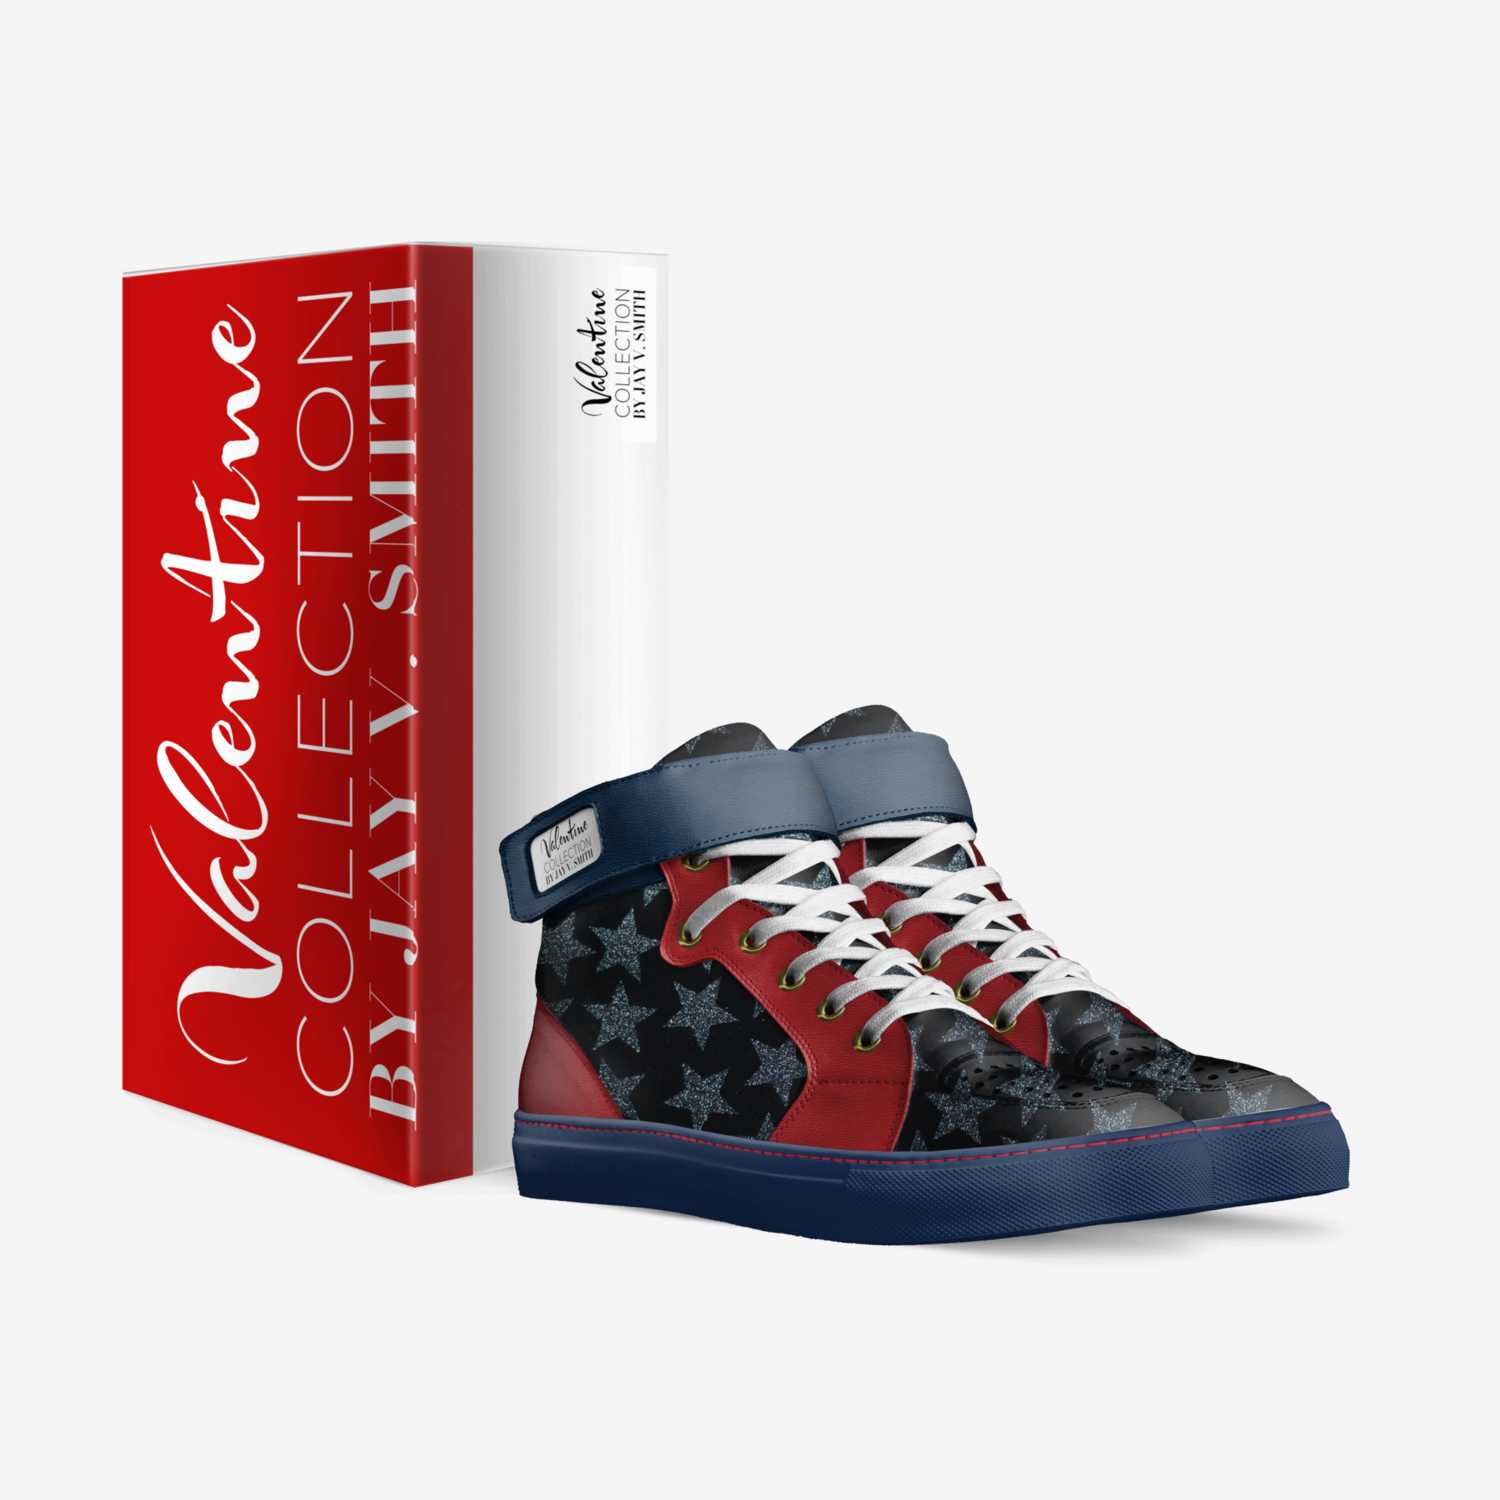 VALENTINE COLLECT. custom made in Italy shoes by Jay V Smith | Box view